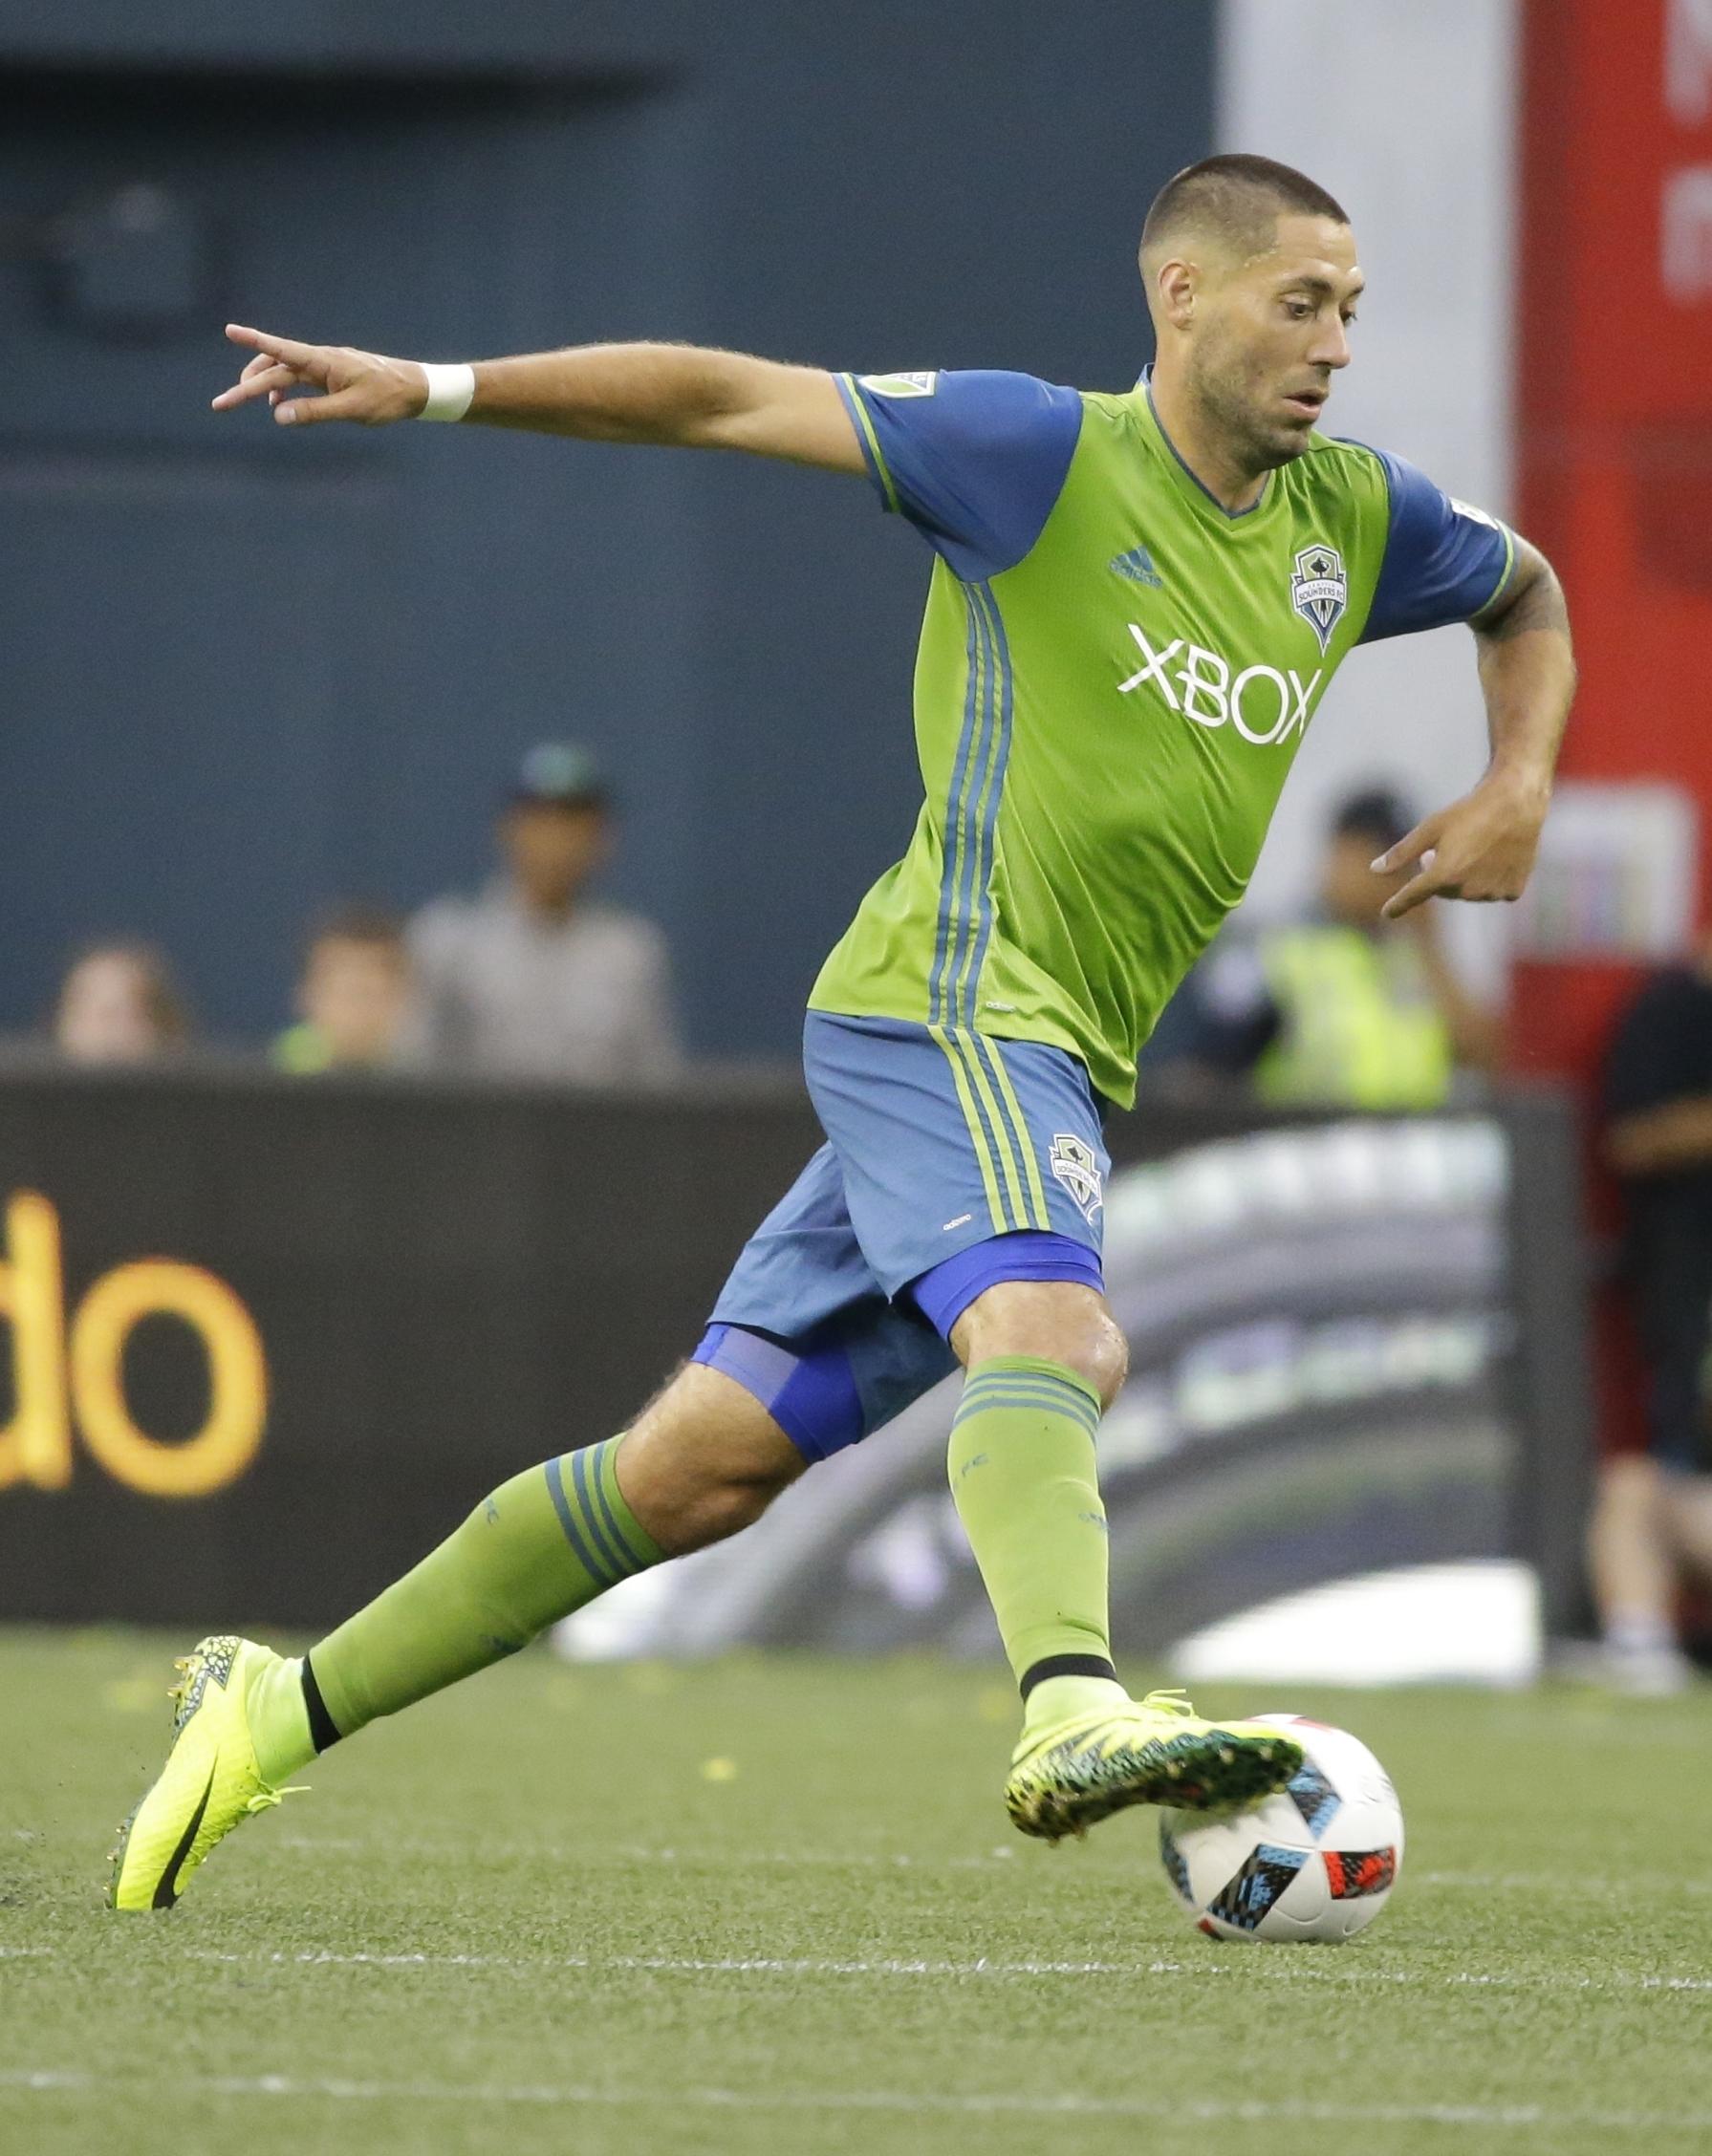 Clint Dempsey cleared to return for MLS champions Seattle Sounders